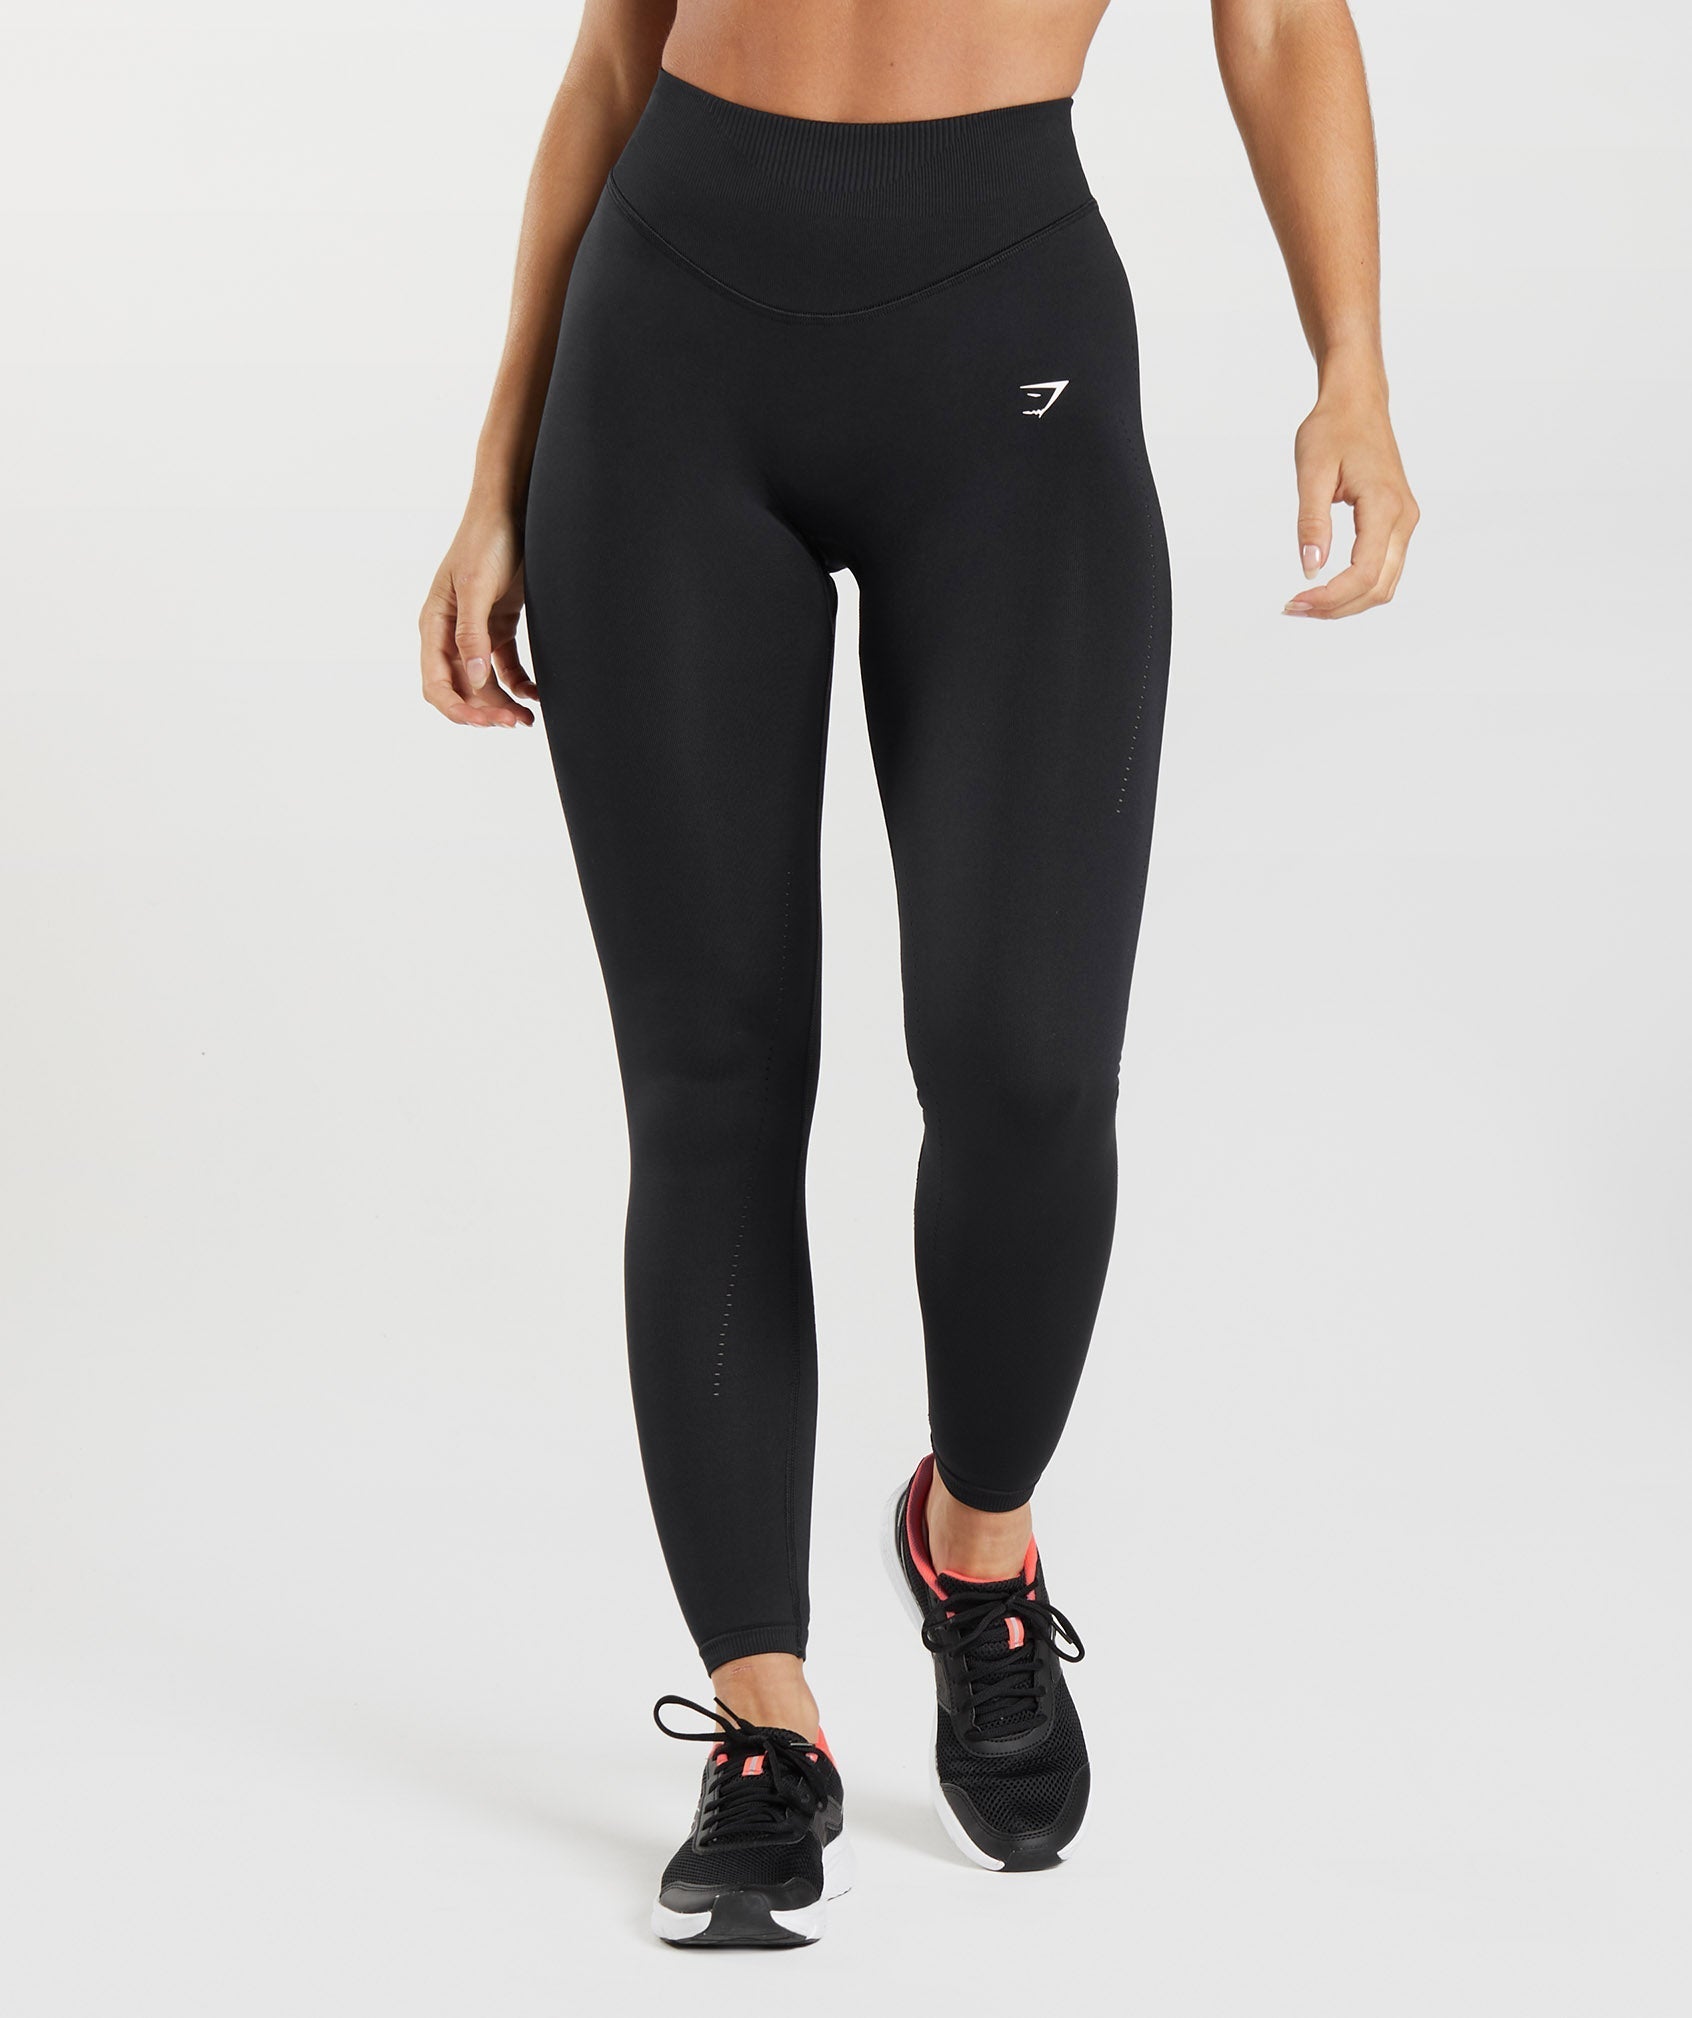 Buy Black Sculpt Pull-On Coated Leggings from the Next UK online shop